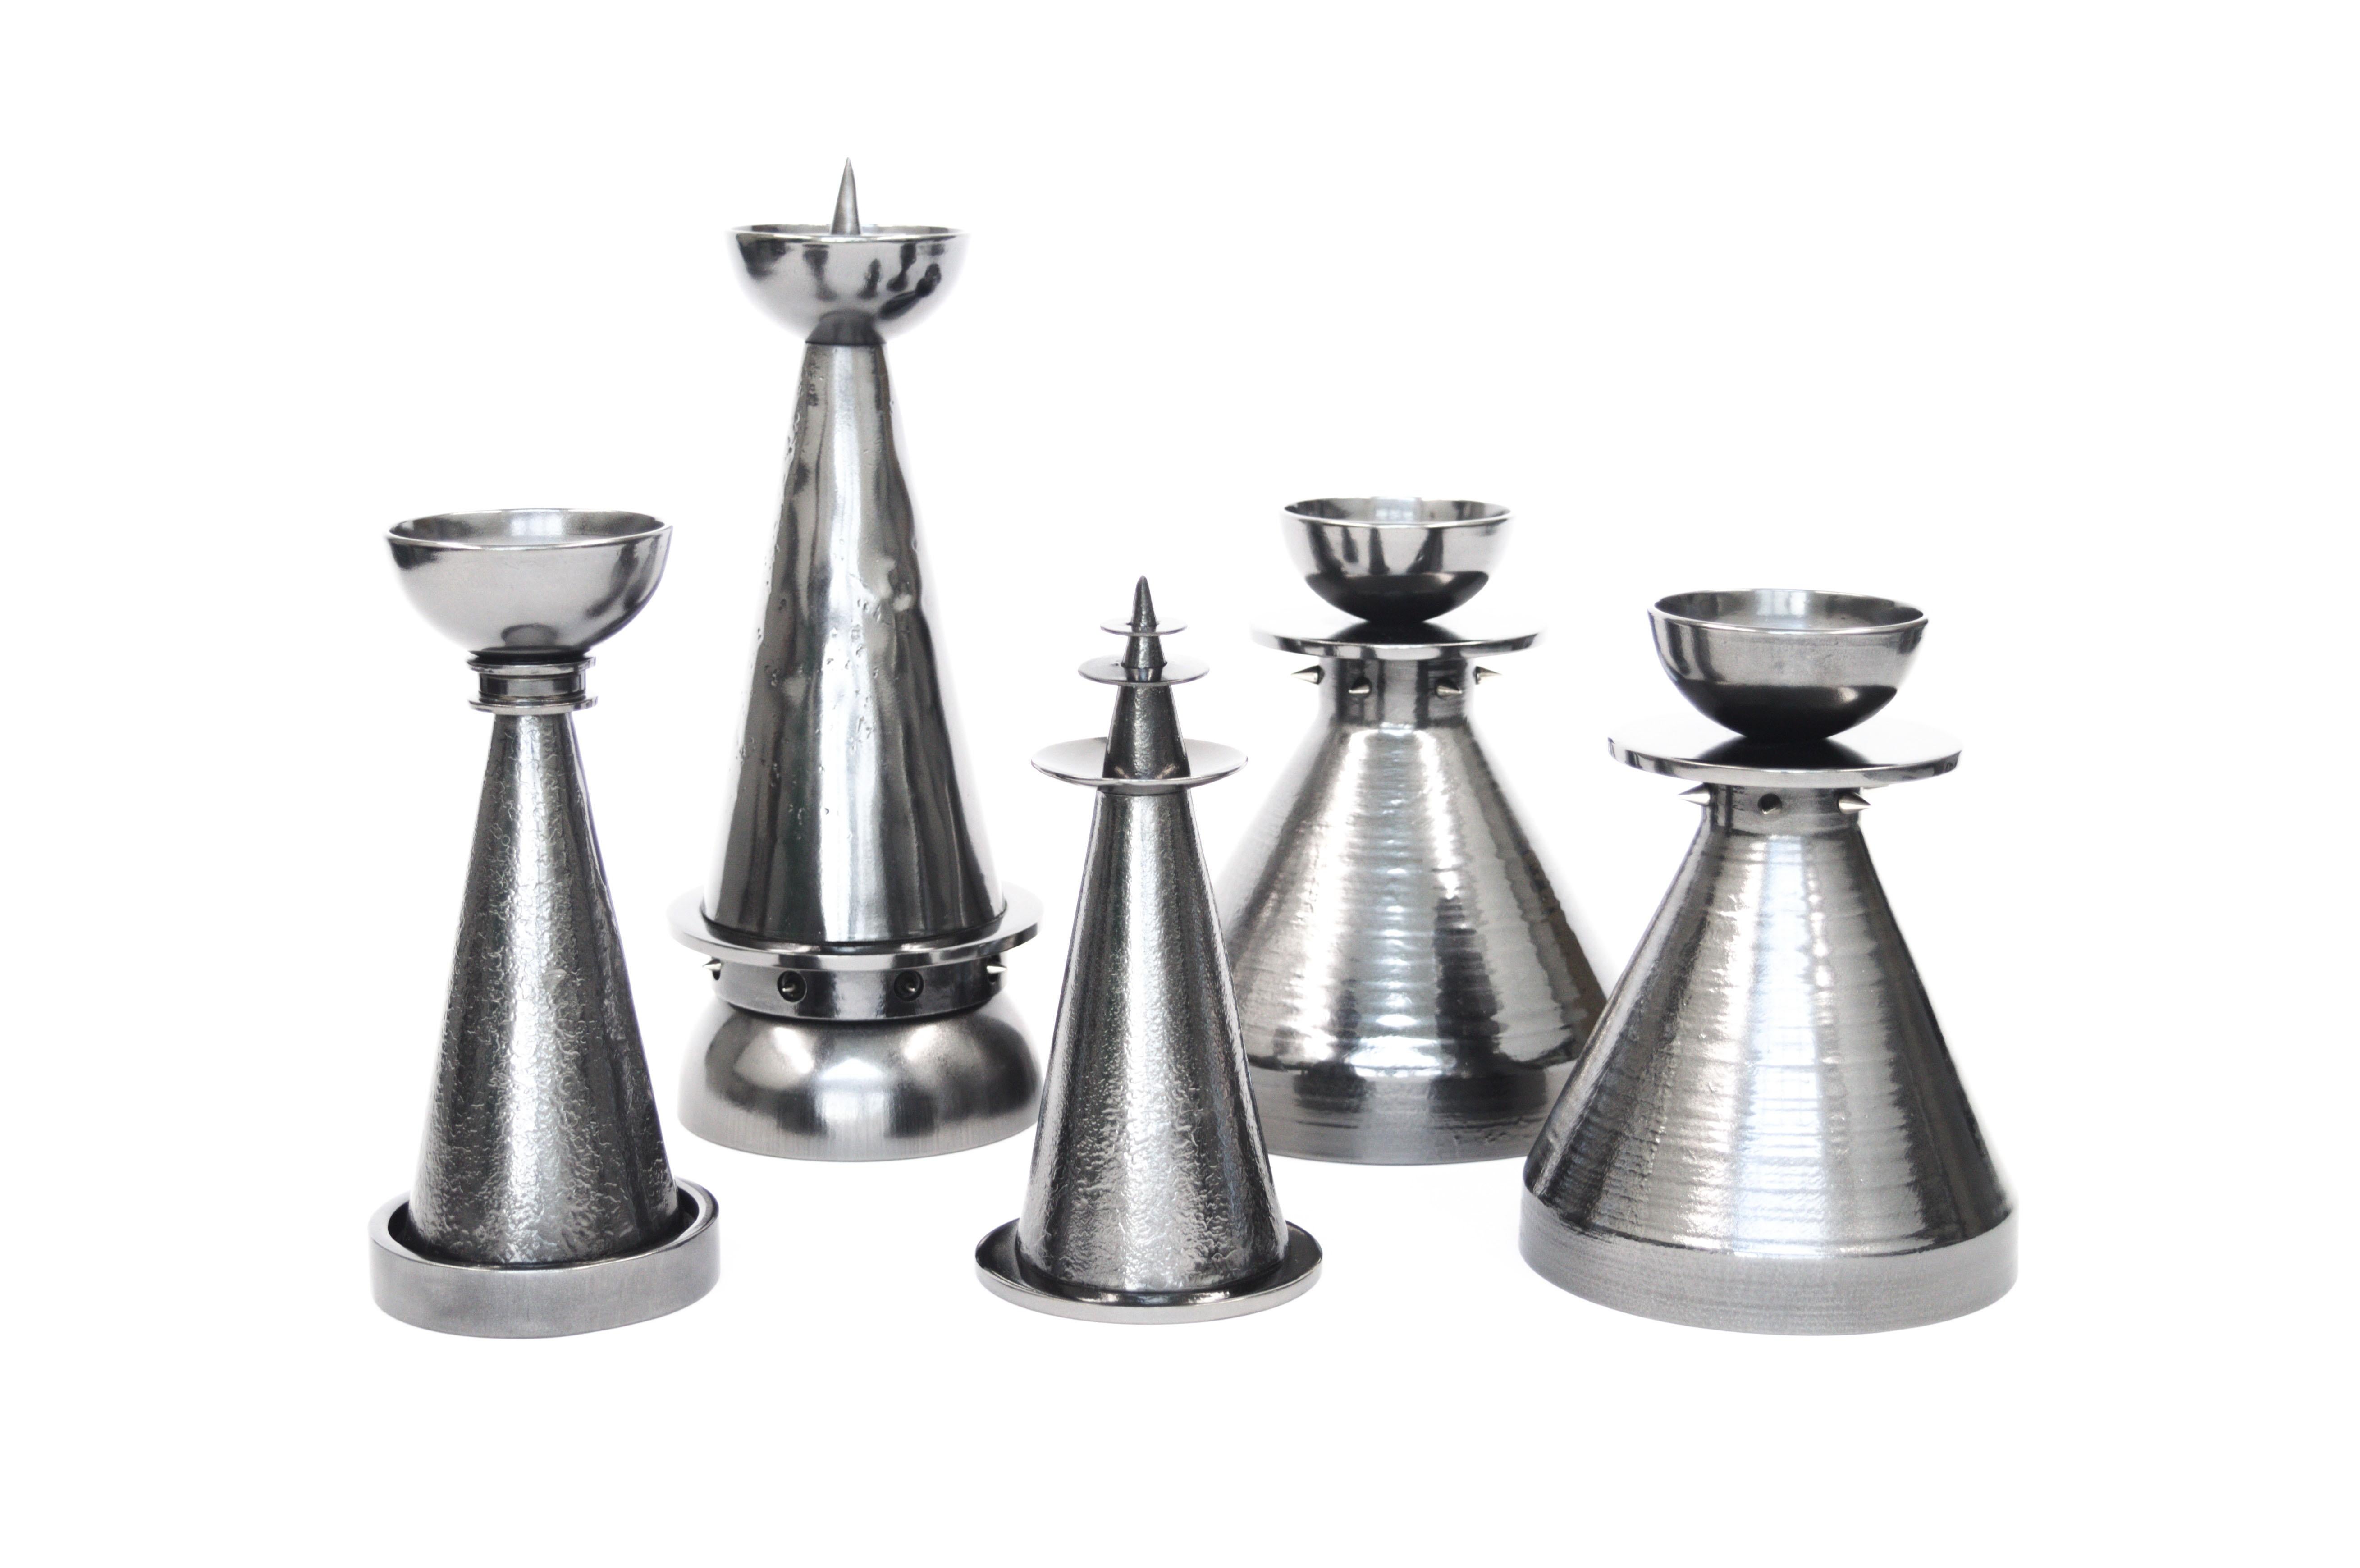 The Vulcan Candlesticks are a set of five futuristic candle holders, created with a combination of industrial forged steel components. Each variant is designed to stack and interact with one other, creating many different combinations for